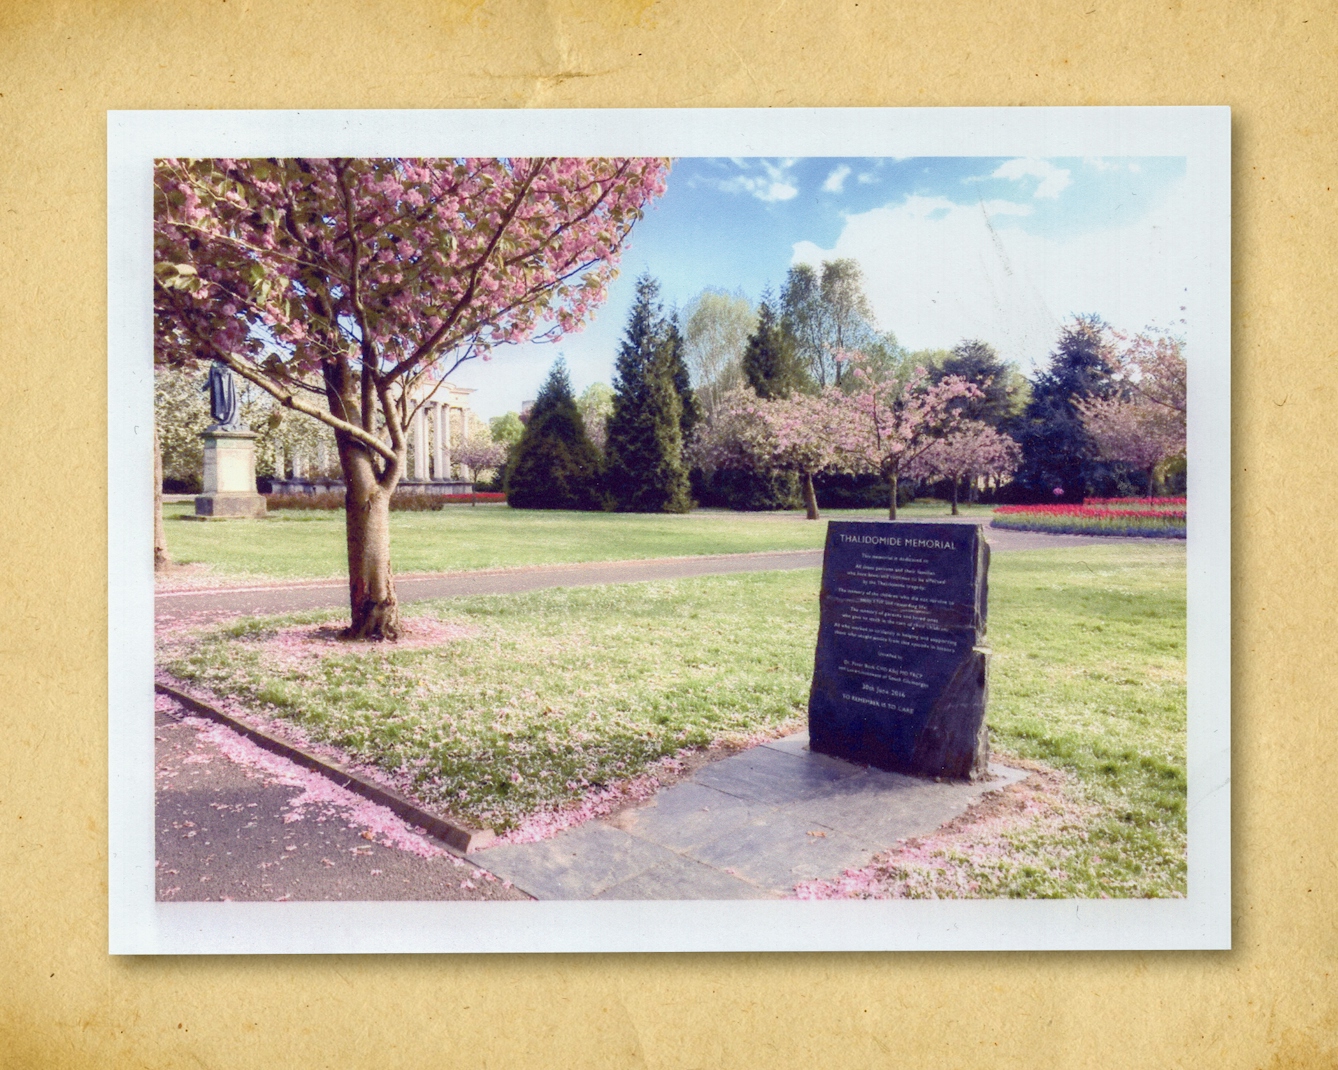 Photograph of a colour photographic inkjet print, resting on a brown paper textured background. The print shows a memorial stone in a parkland. It is surrounded by grass and a tree in blossom, whose petals have begun to fall and cover the ground. In the background are trees, a statue and a columned building. The title of the memorial can just be read, showing the words, 'Thalidomide Memorial'.